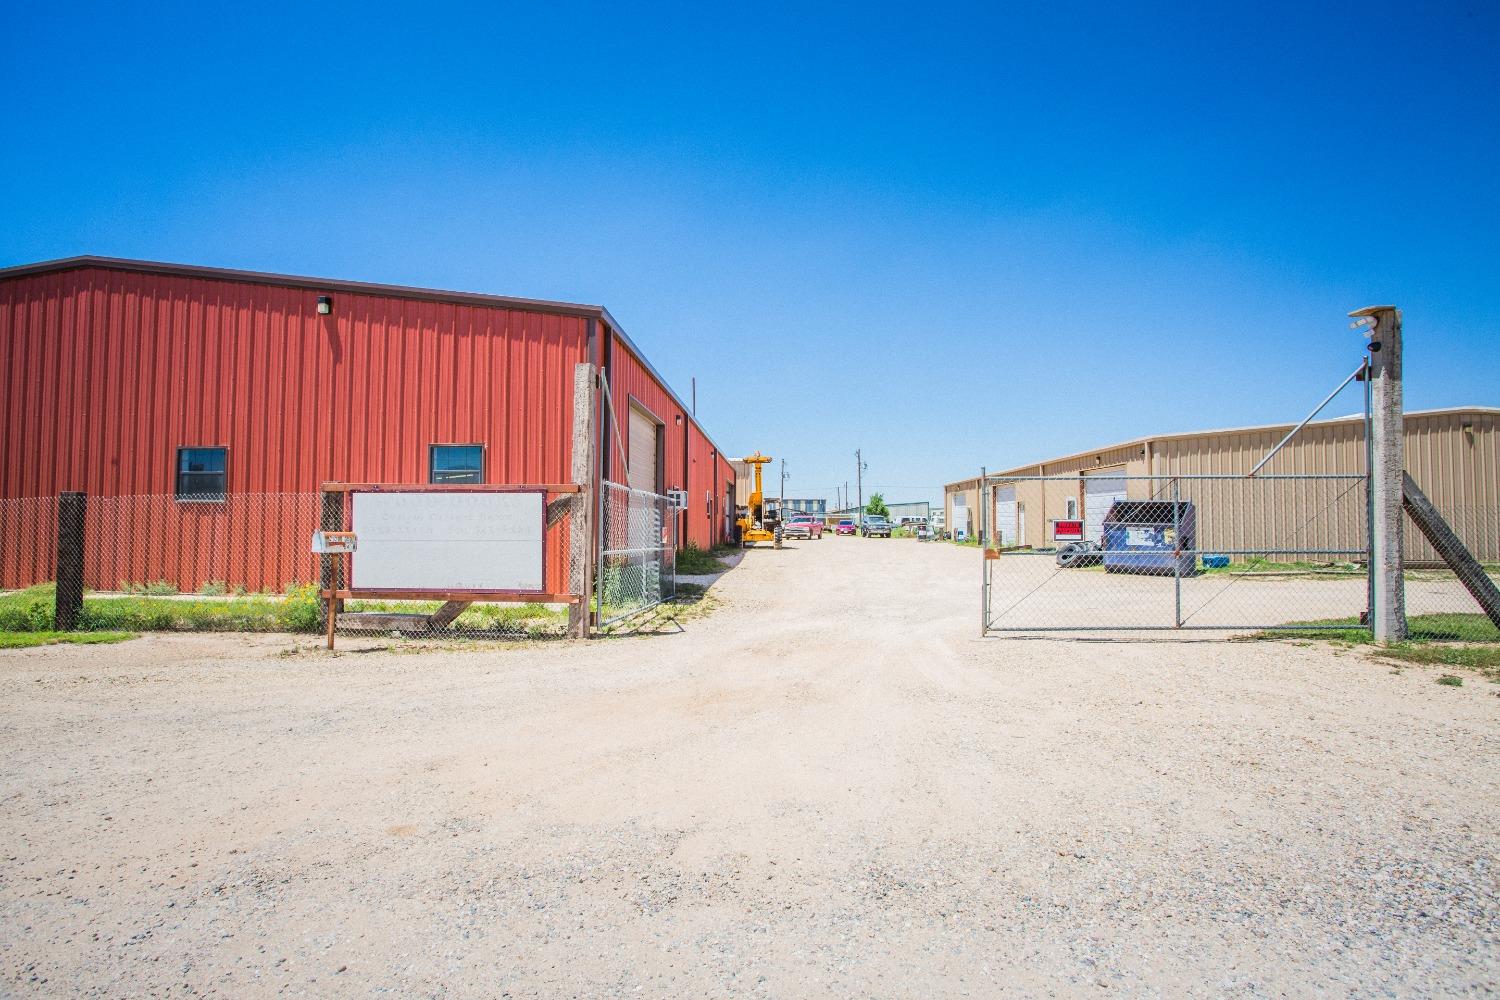 Great location, just inside the new Loop 88 and University Avenue, with easy access to I-27. Three buildings on this 2.02 acre tract. The main shop has more than 12,000 sq.ft and has a kitchenette and office area with granite countertops and desk space. The main shop has been a custom cabinet door shop for many years featuring a custom built vacuum system, with all equipment and machinery onsite to convey.    The two additional buildings (5400 sq.ft. each) feature a total of (6) six individual shops, currently leased month to month.